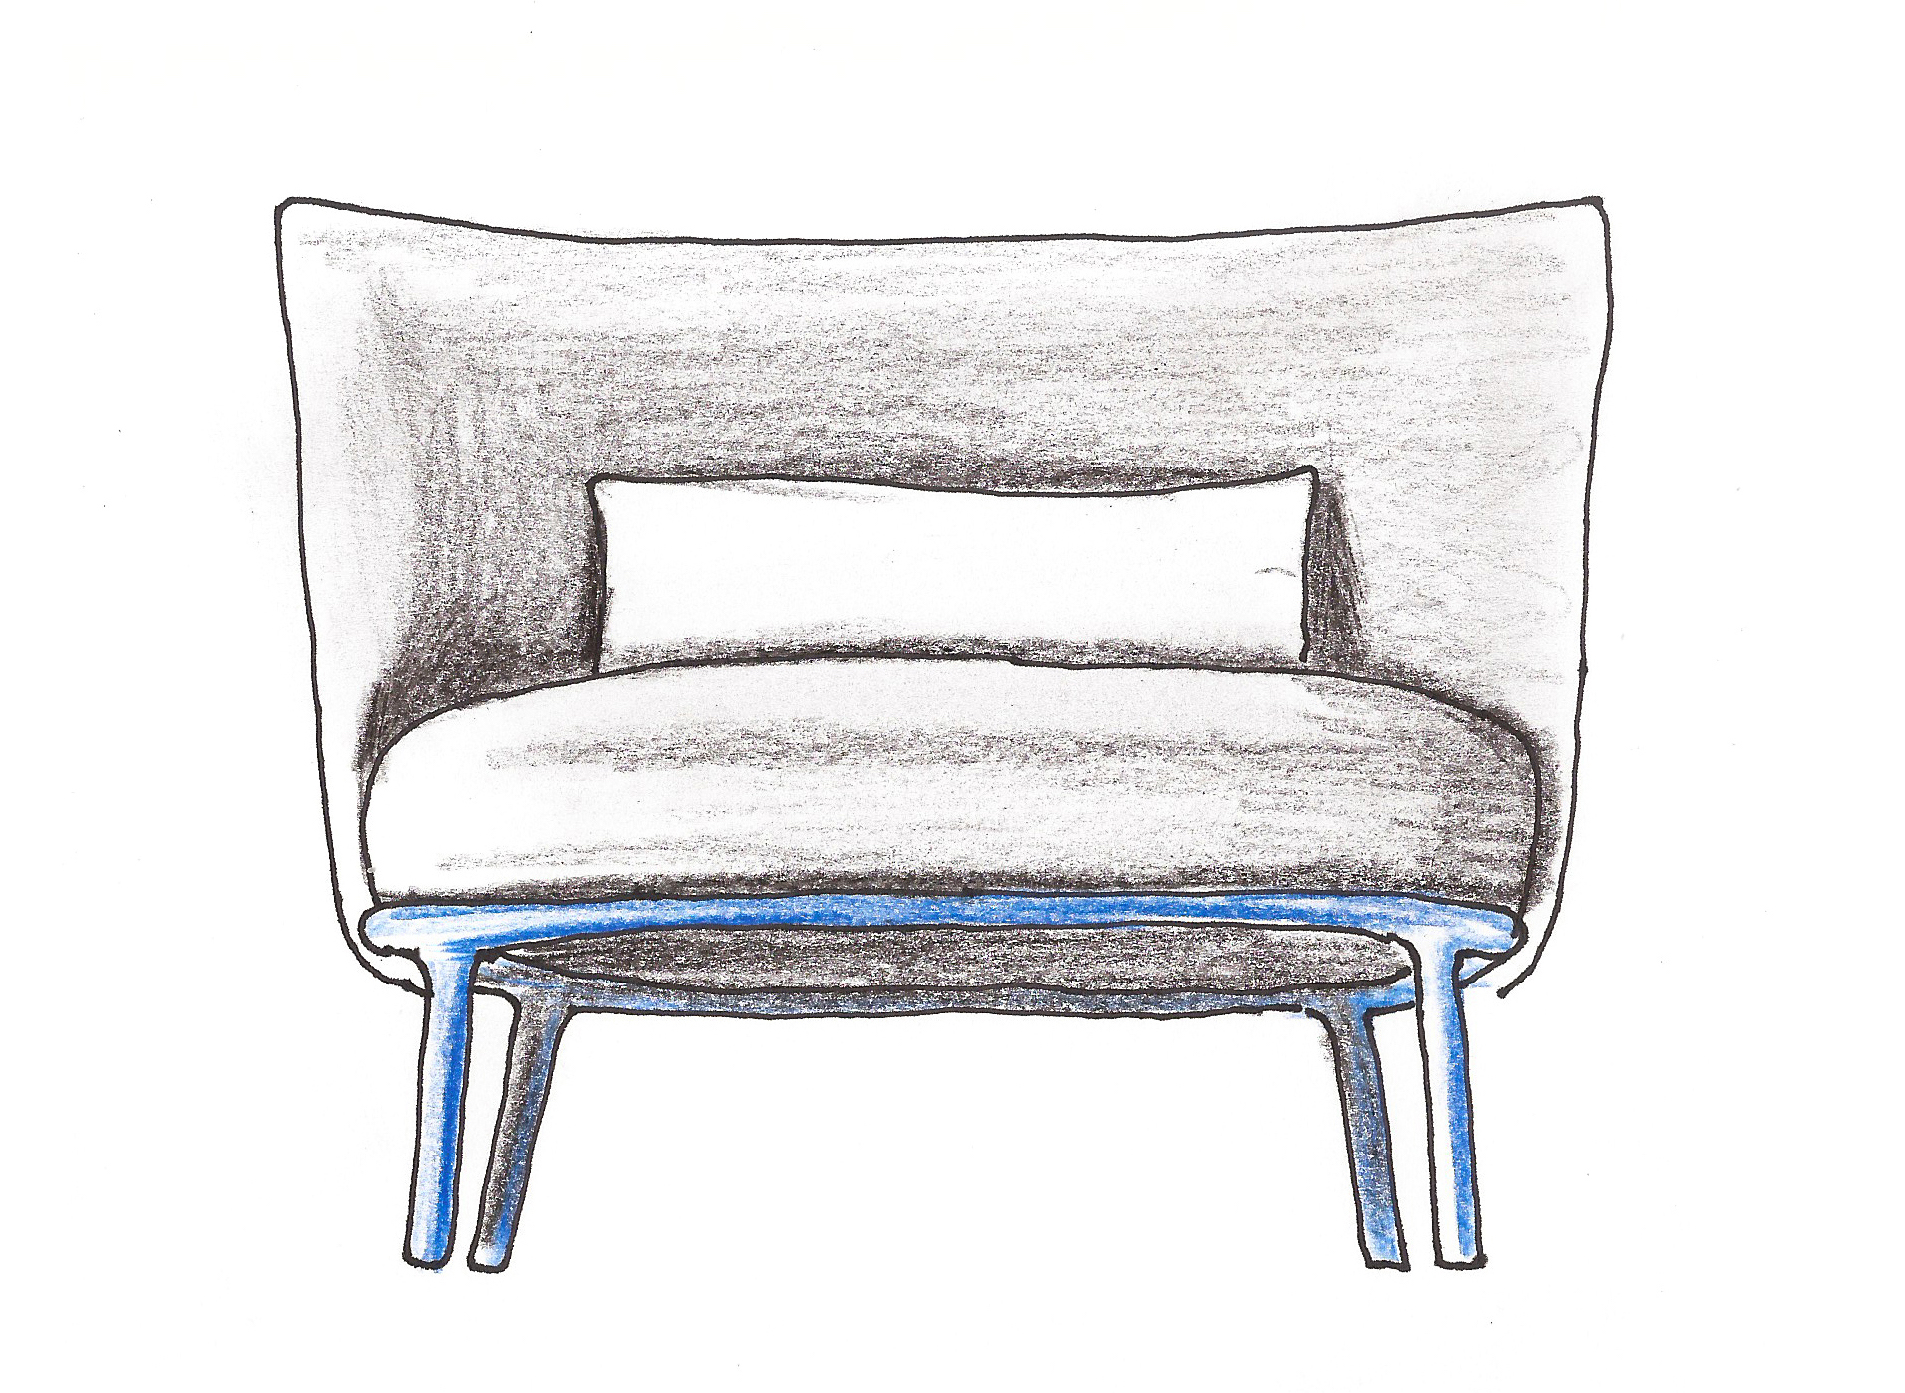 Shift easychair sketch by Debiasi Sandri for Offecct